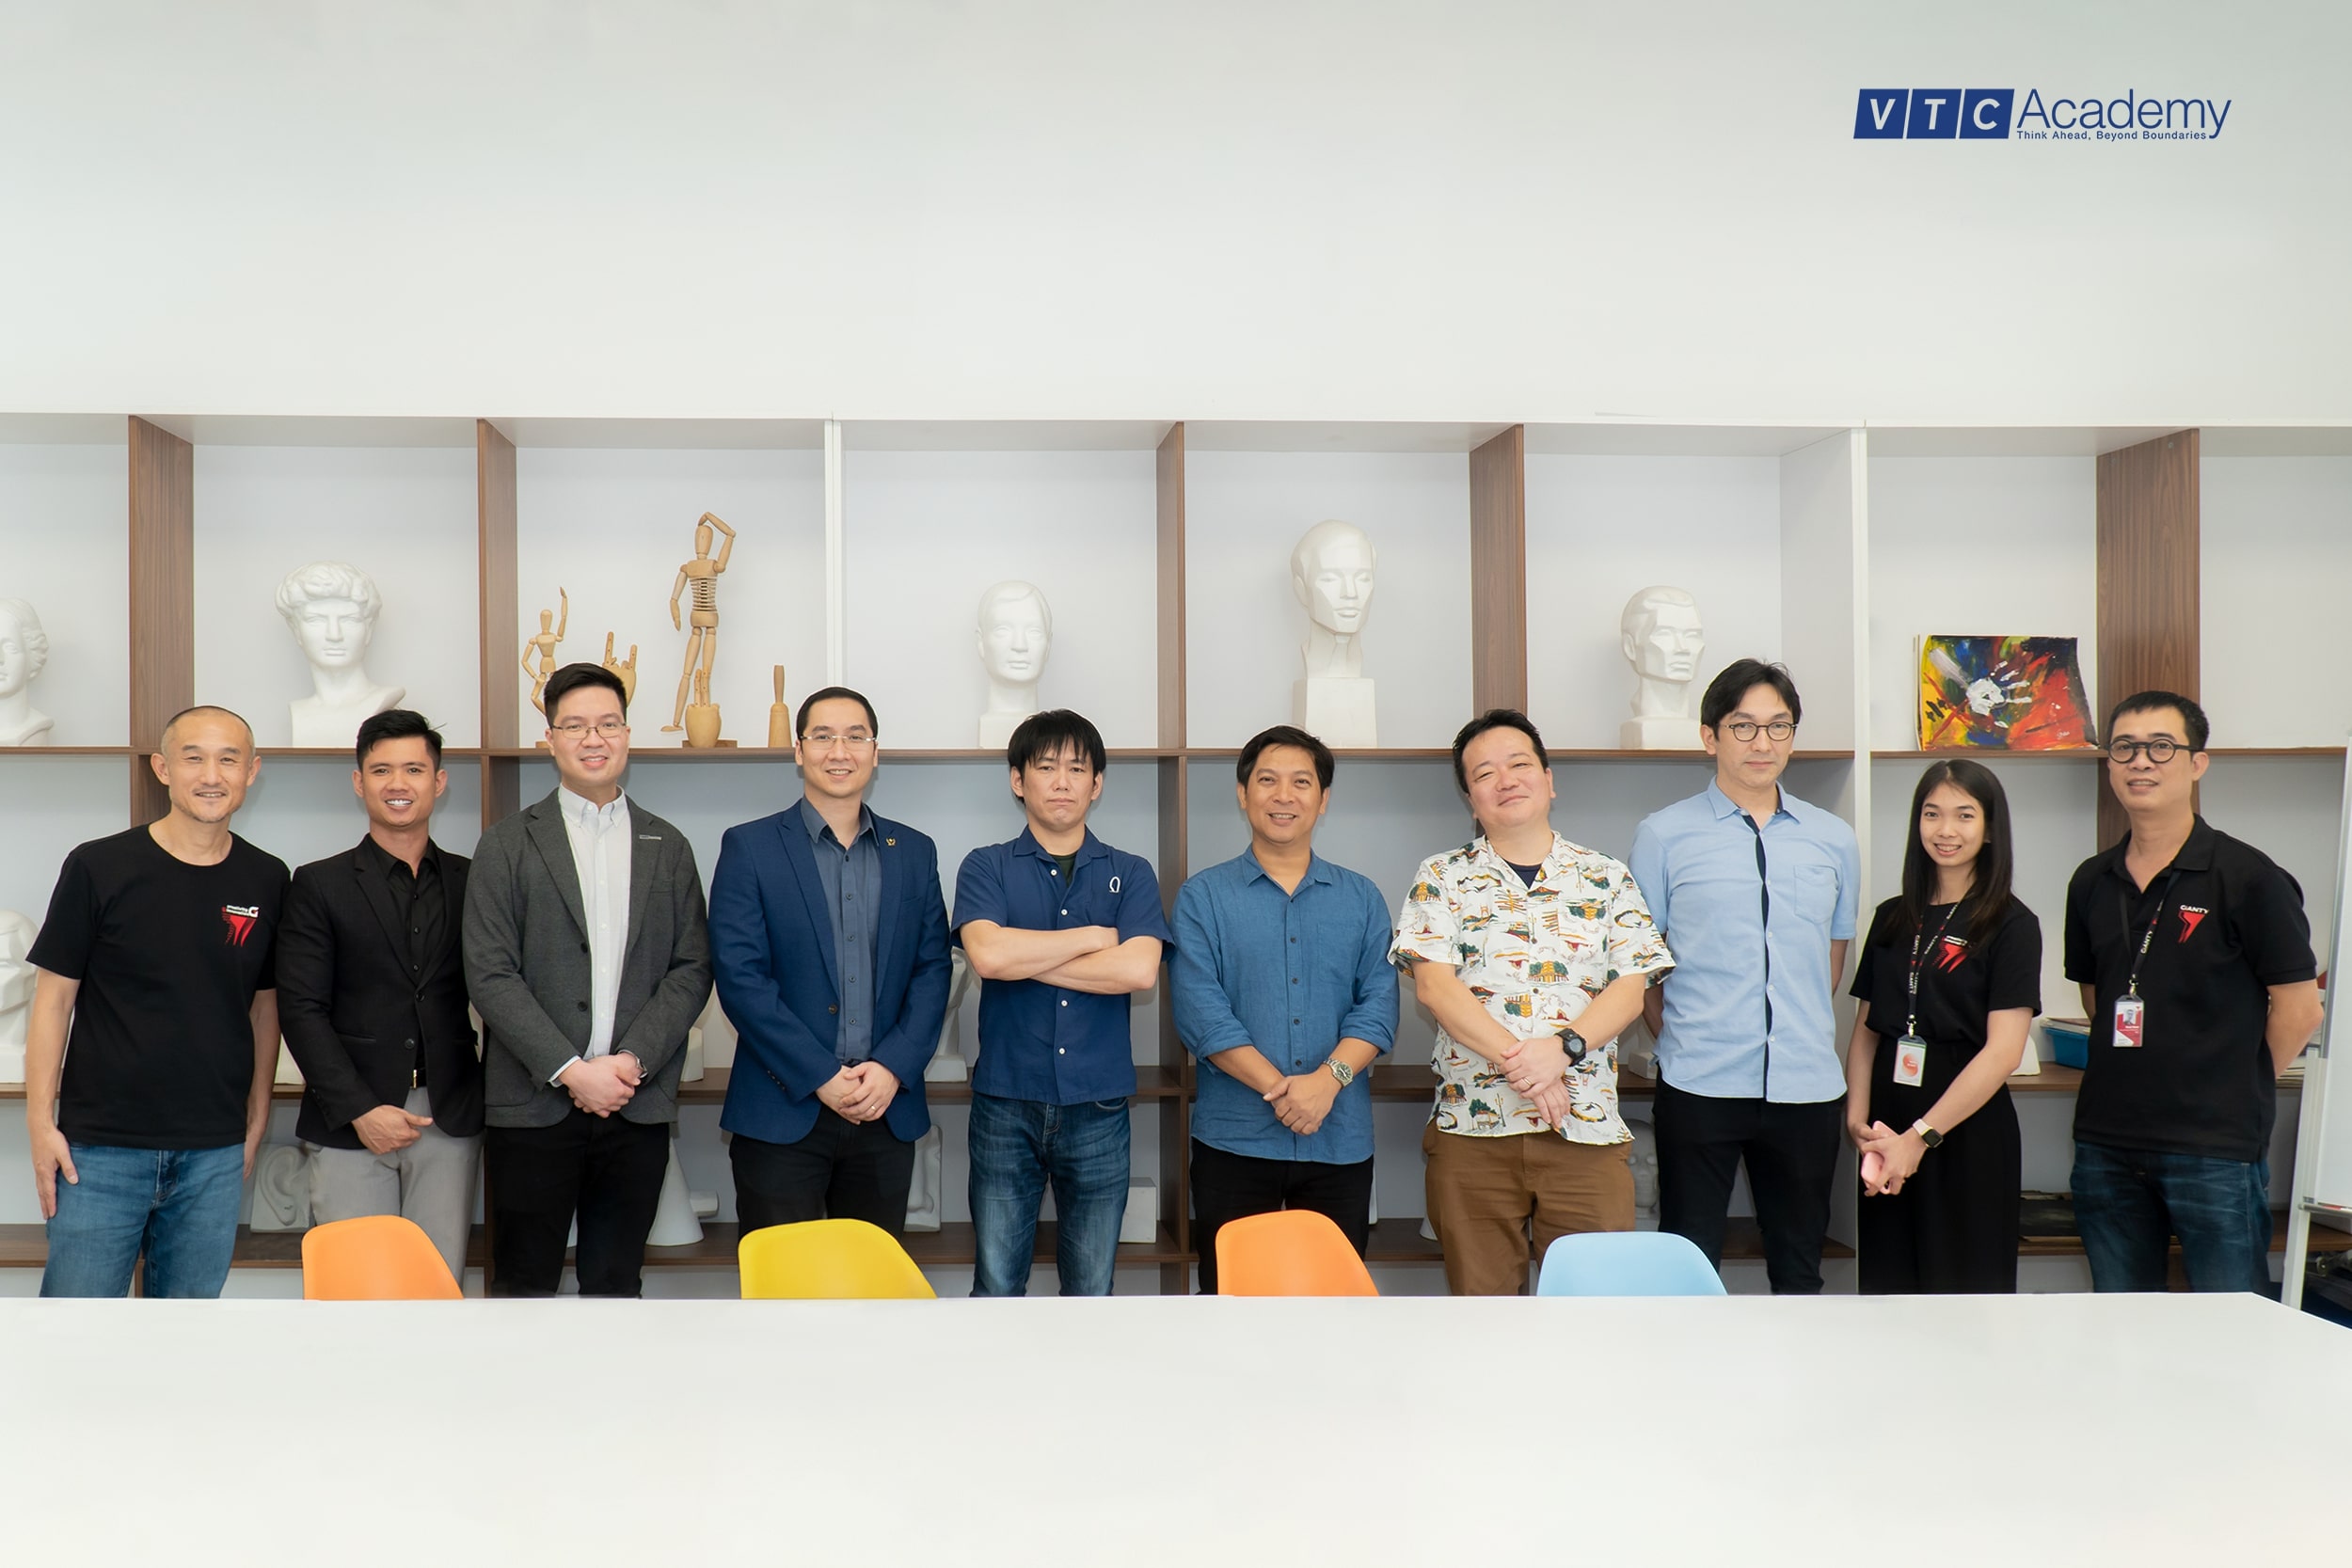 Review VTC Academy:  VTC Academy is honored to welcome a delegation from the company GIANTY Vietnam for an exchange and visit.